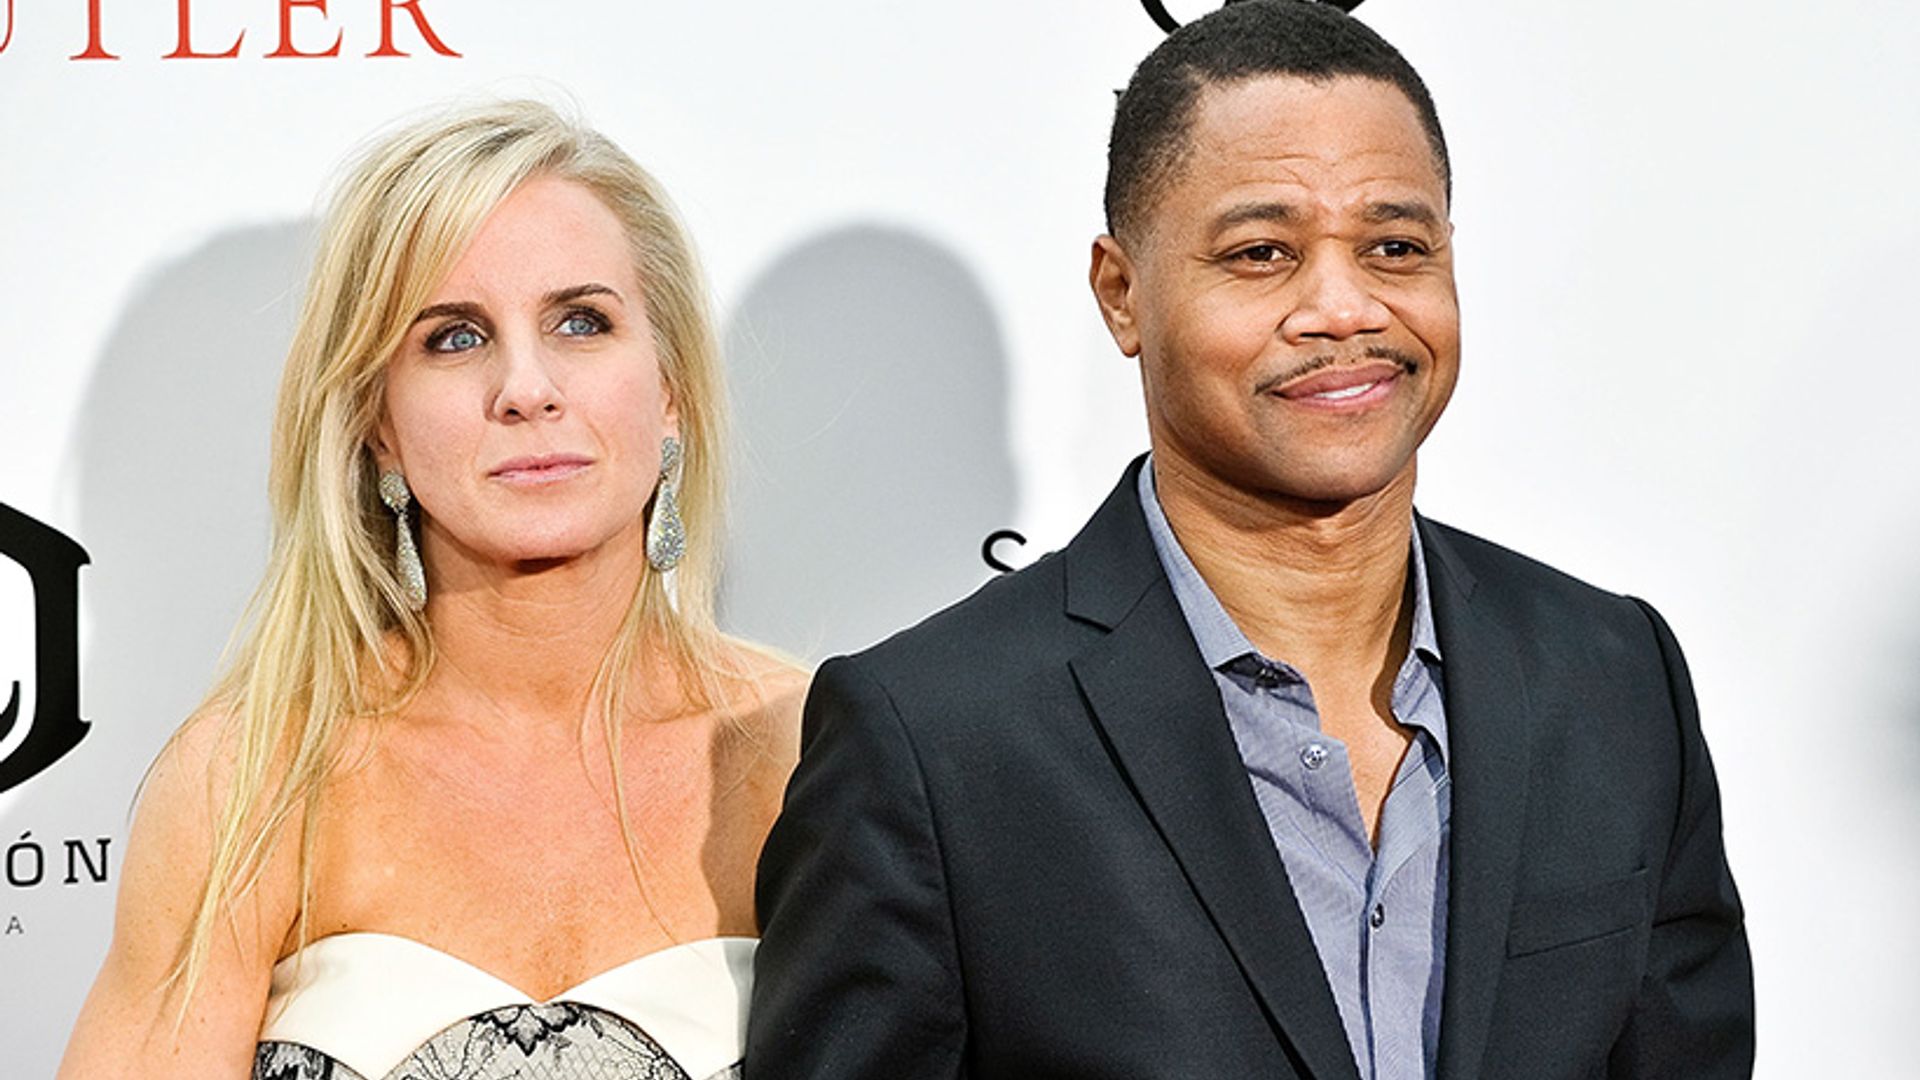 Cuba Gooding Jr ends 22 year marriage to wife Sara Kapfer